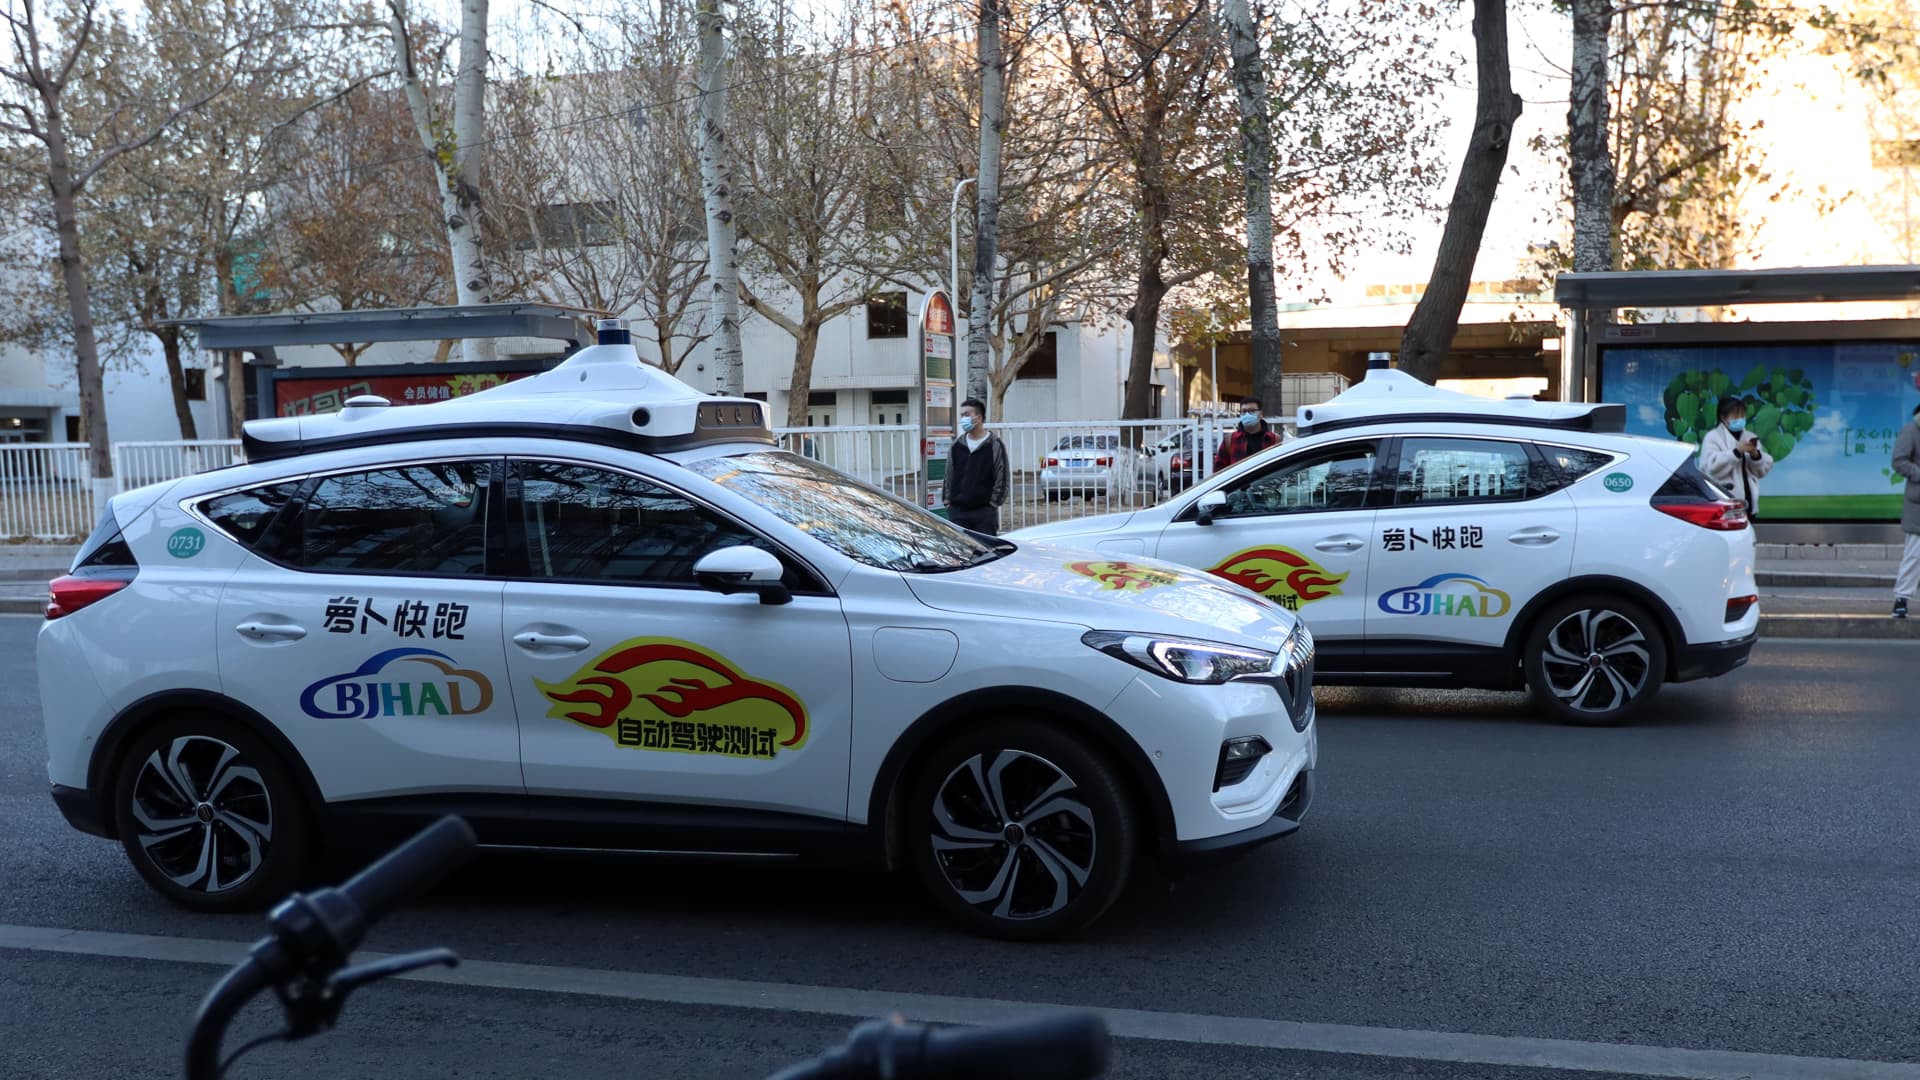 Baidu claims its robotaxis rival traditional ride-hailing in parts of China